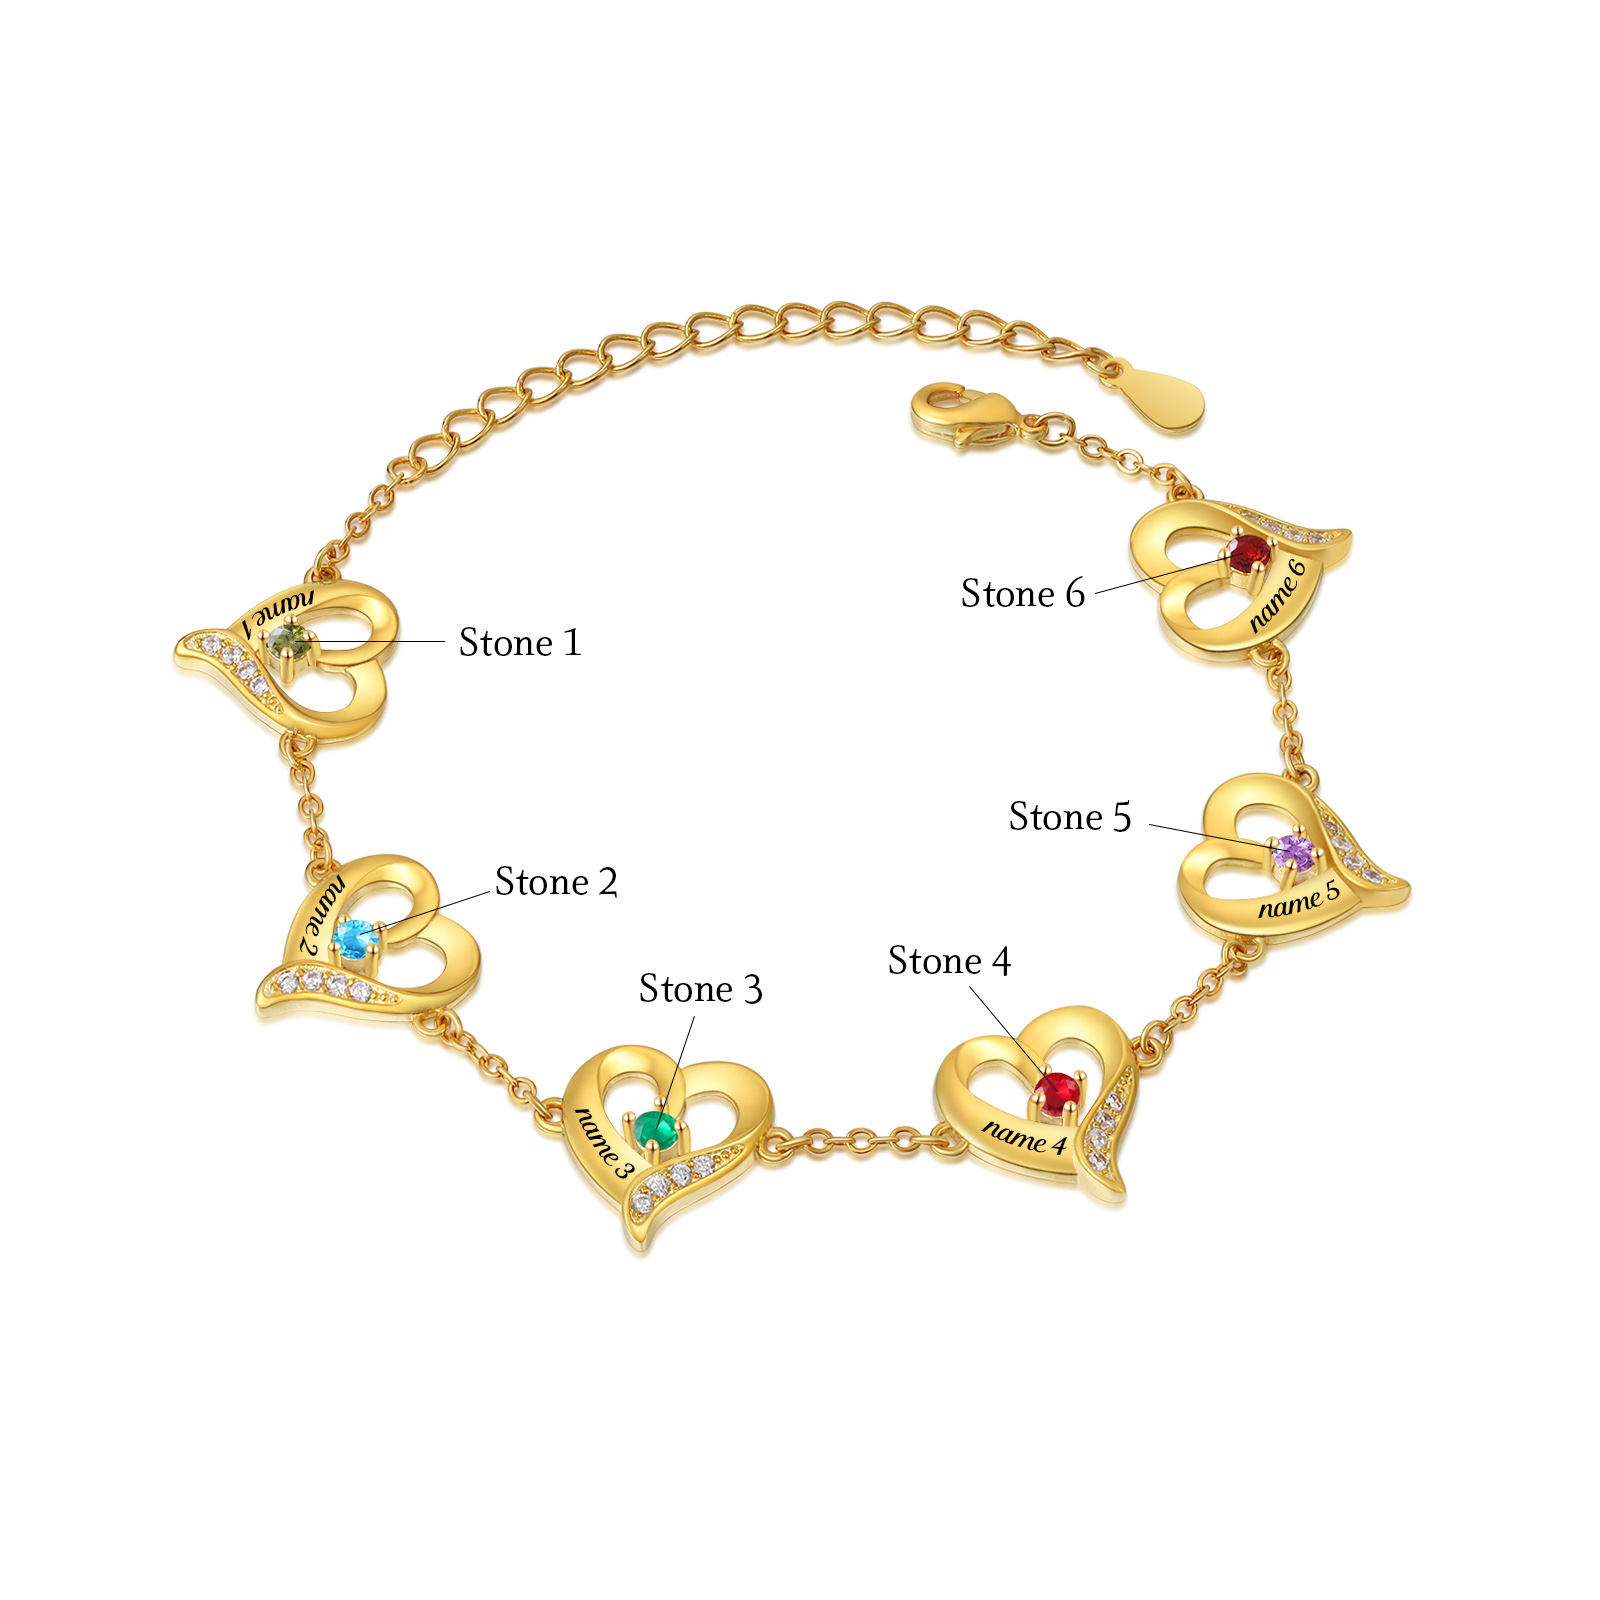 6 Names-Personalized Heart Bracelet With 6 Birthstones Engraved Names Bangle For Her